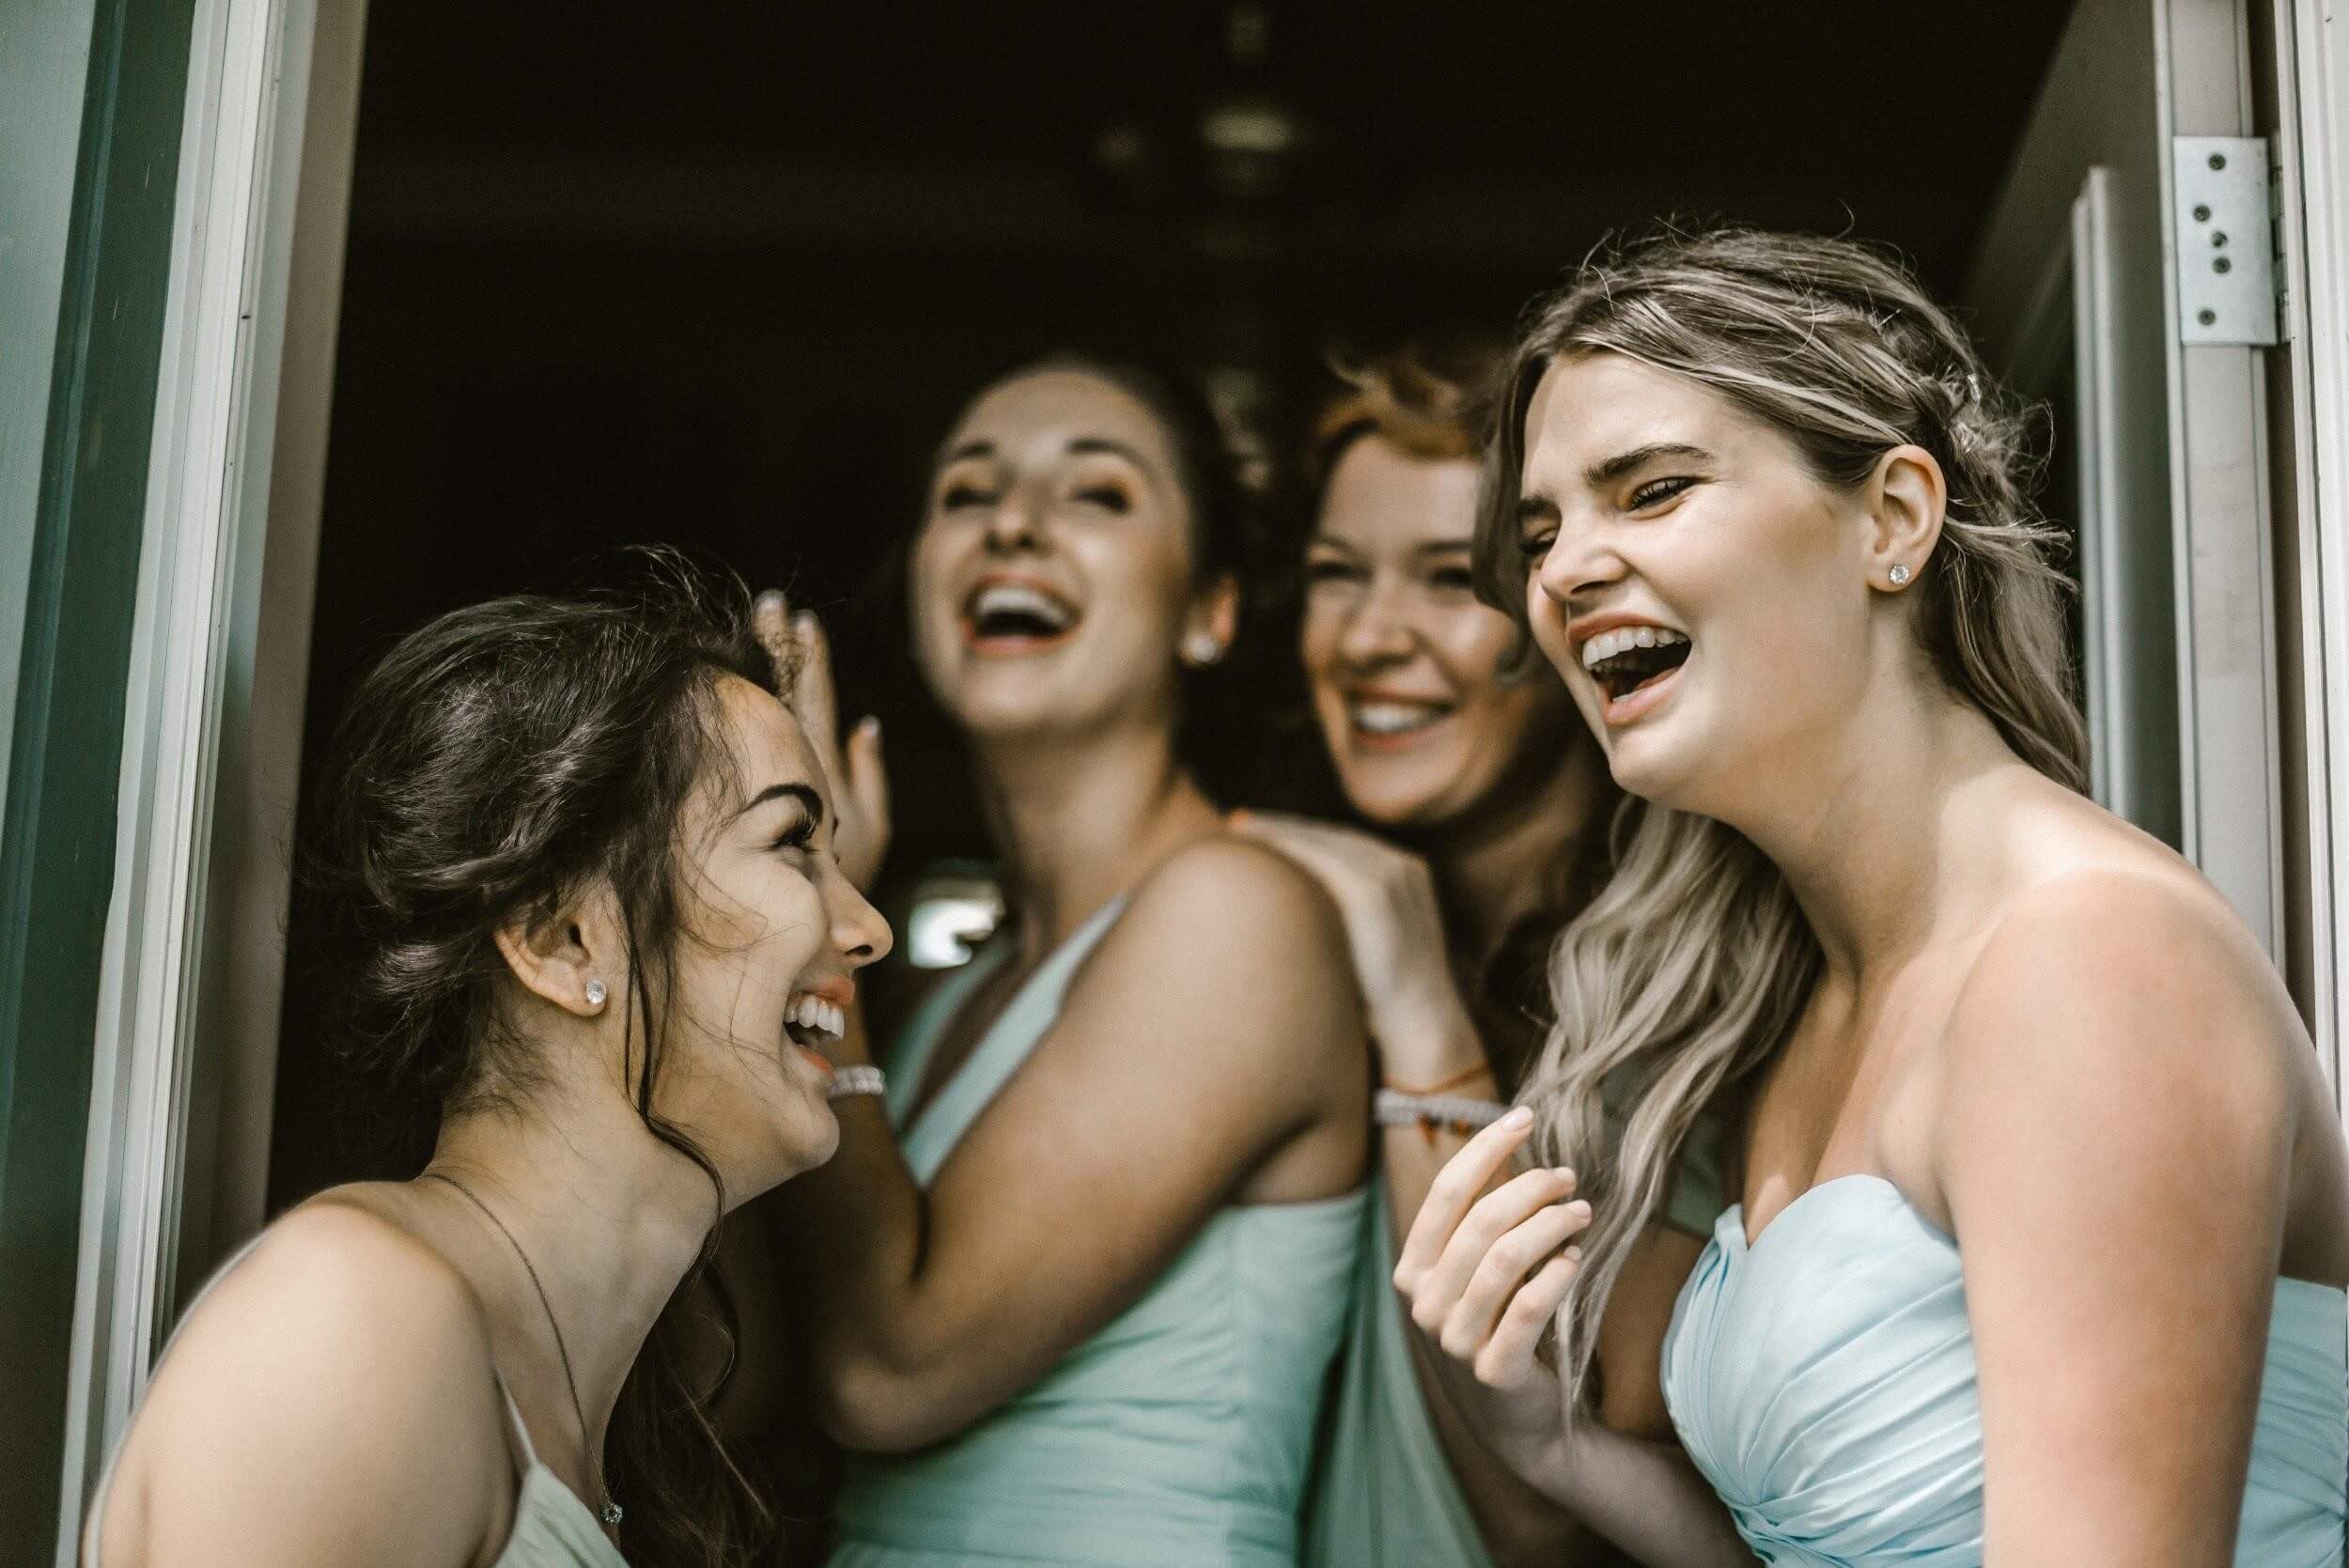 Smiling women at the bachelorette party